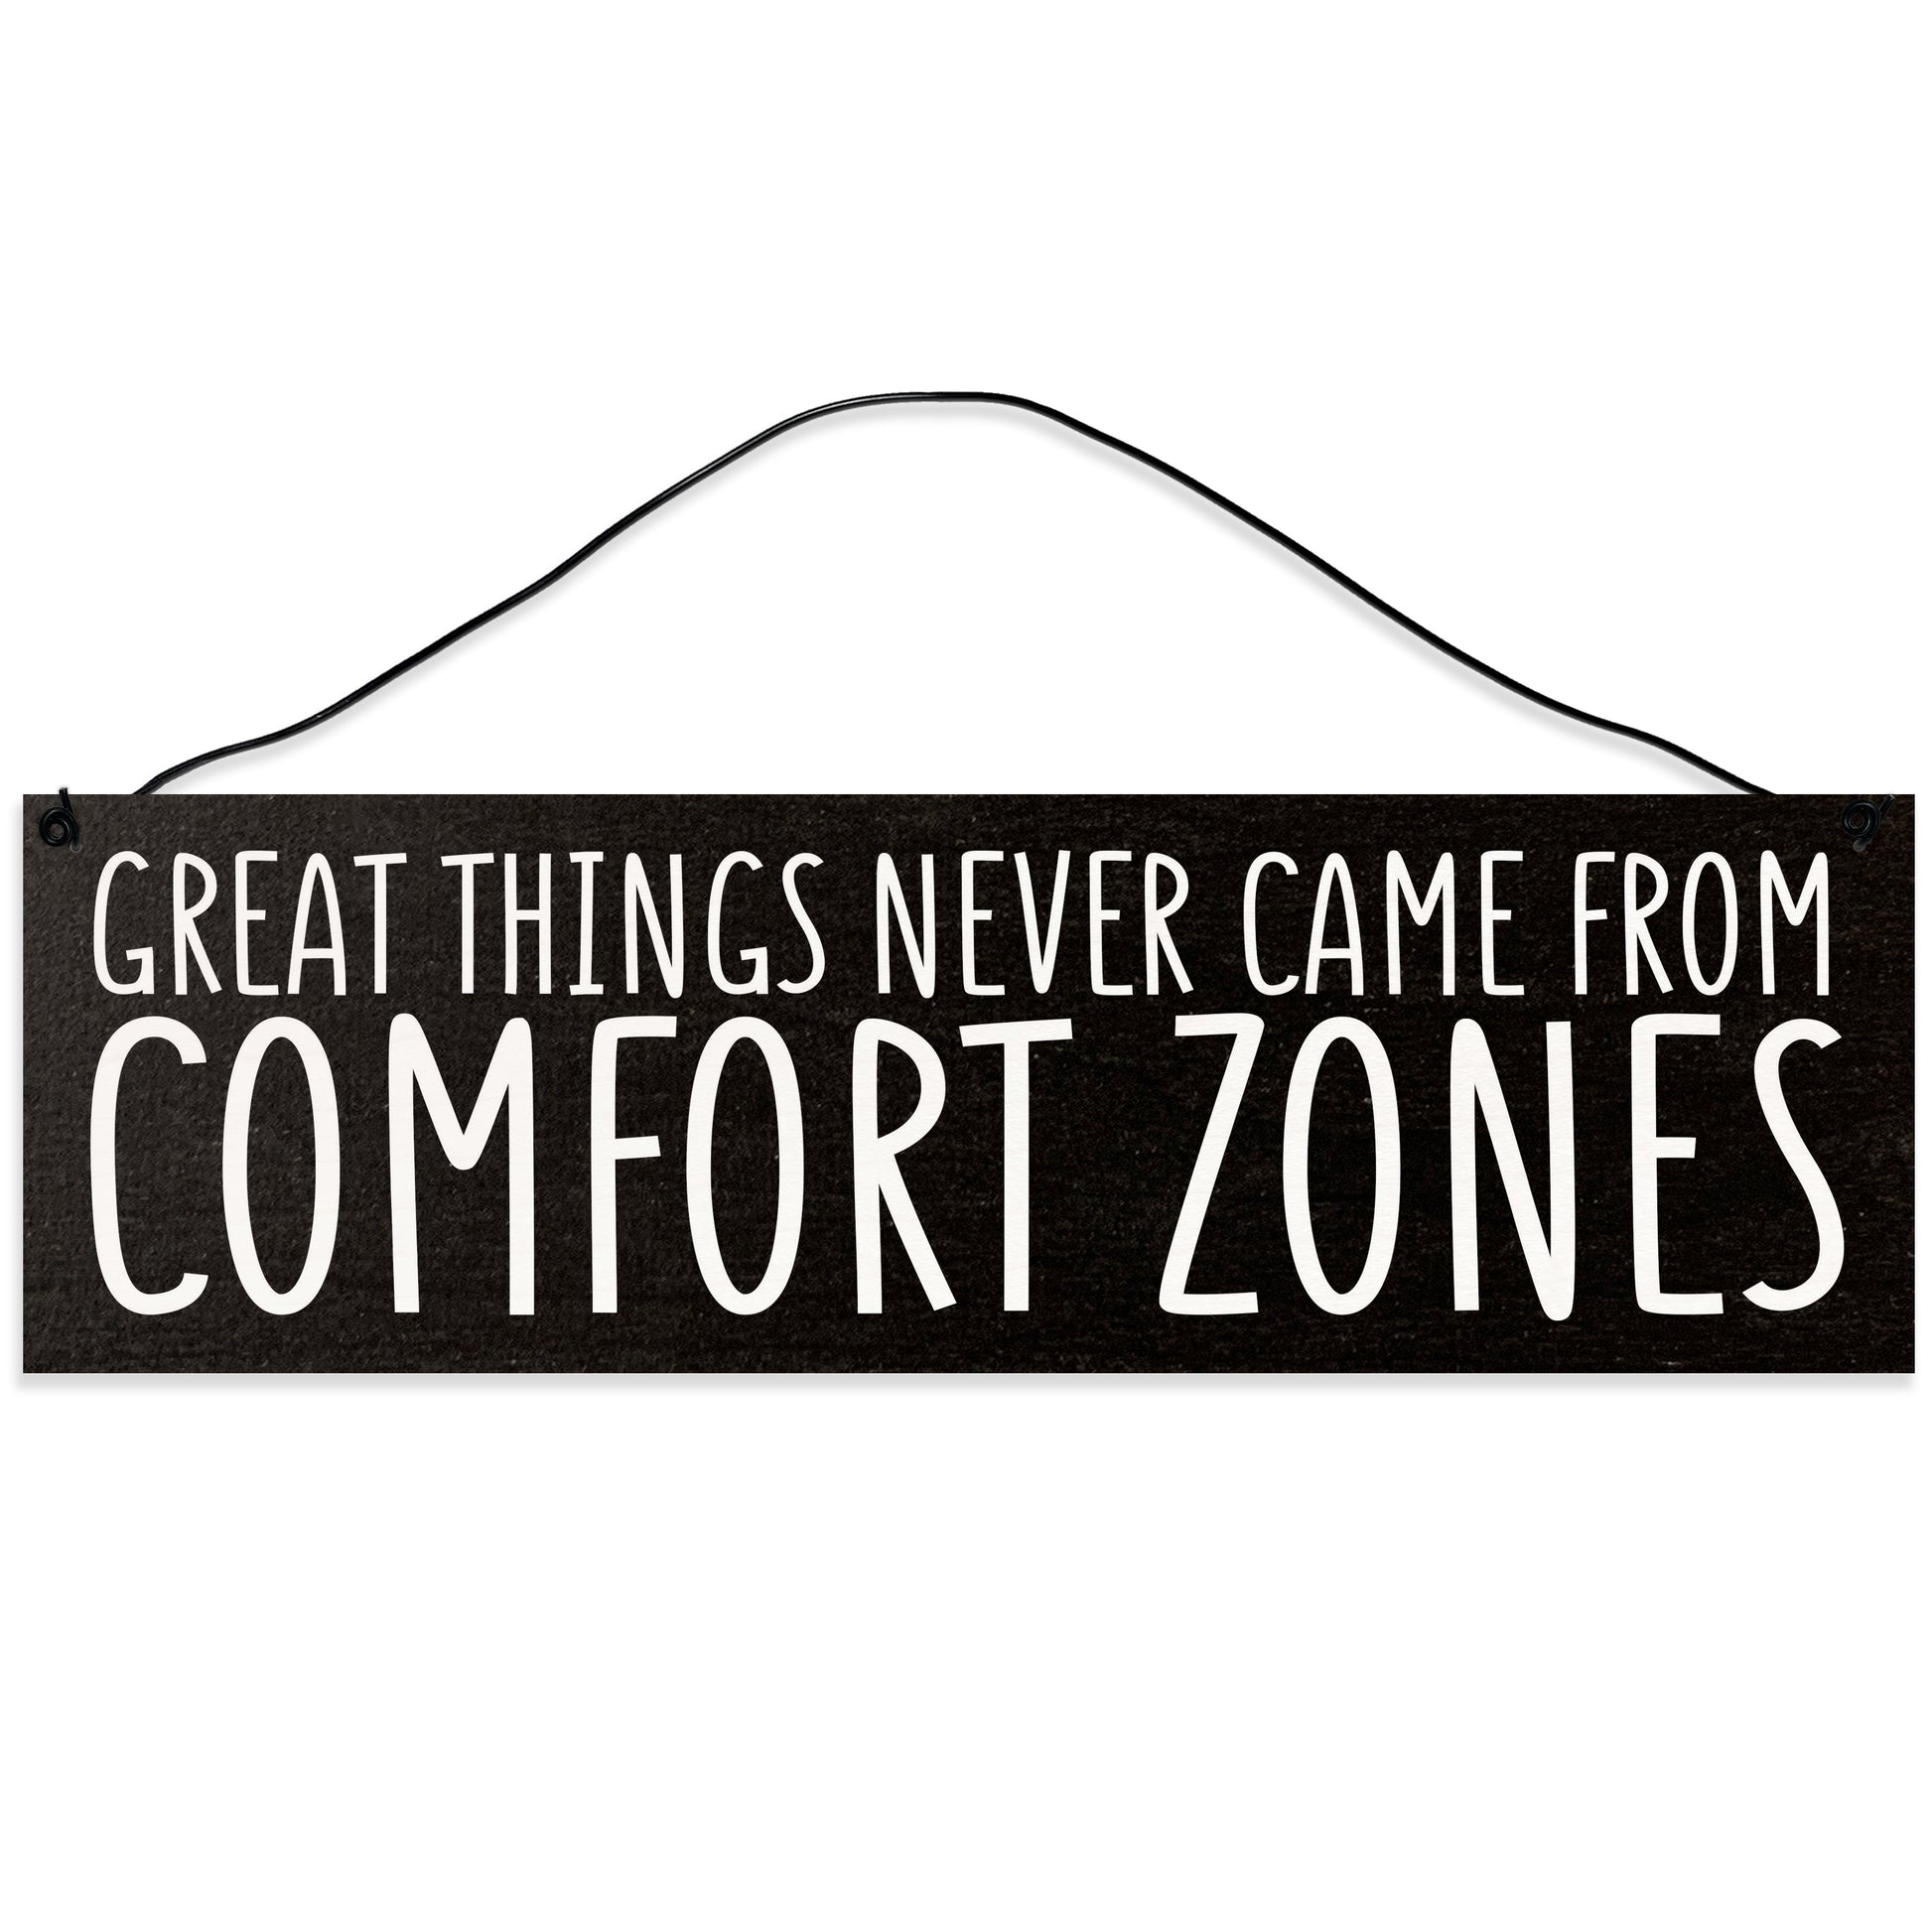 Sawyer's Mill - Great Things Never Came from Comfort Zones. Wood Sign for Home or Office. Measures 3x10 inches.